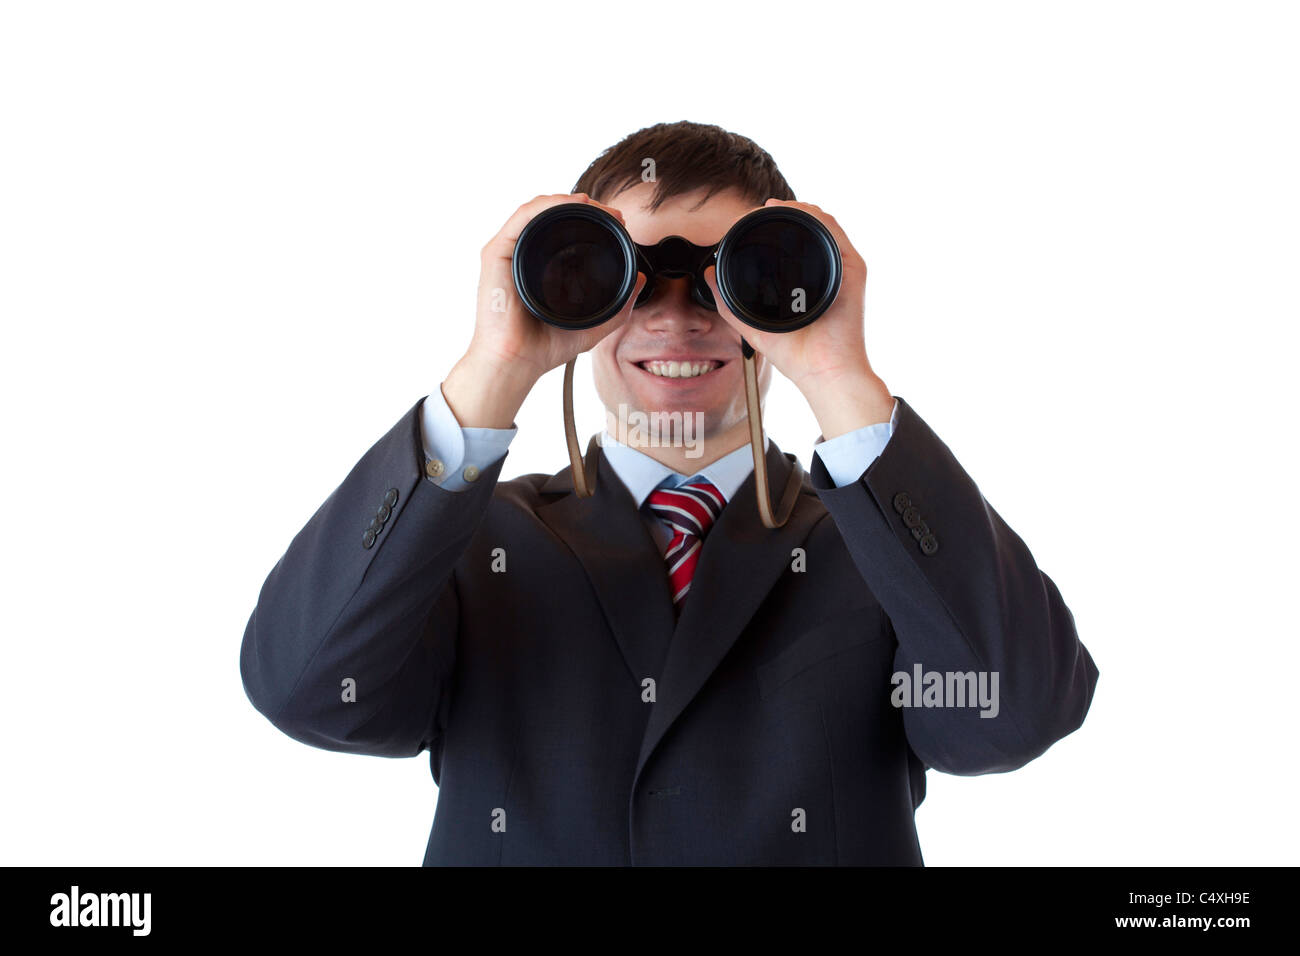 Smiling businessman looks through binoculars and espies business.Isolated on white background Stock Photo